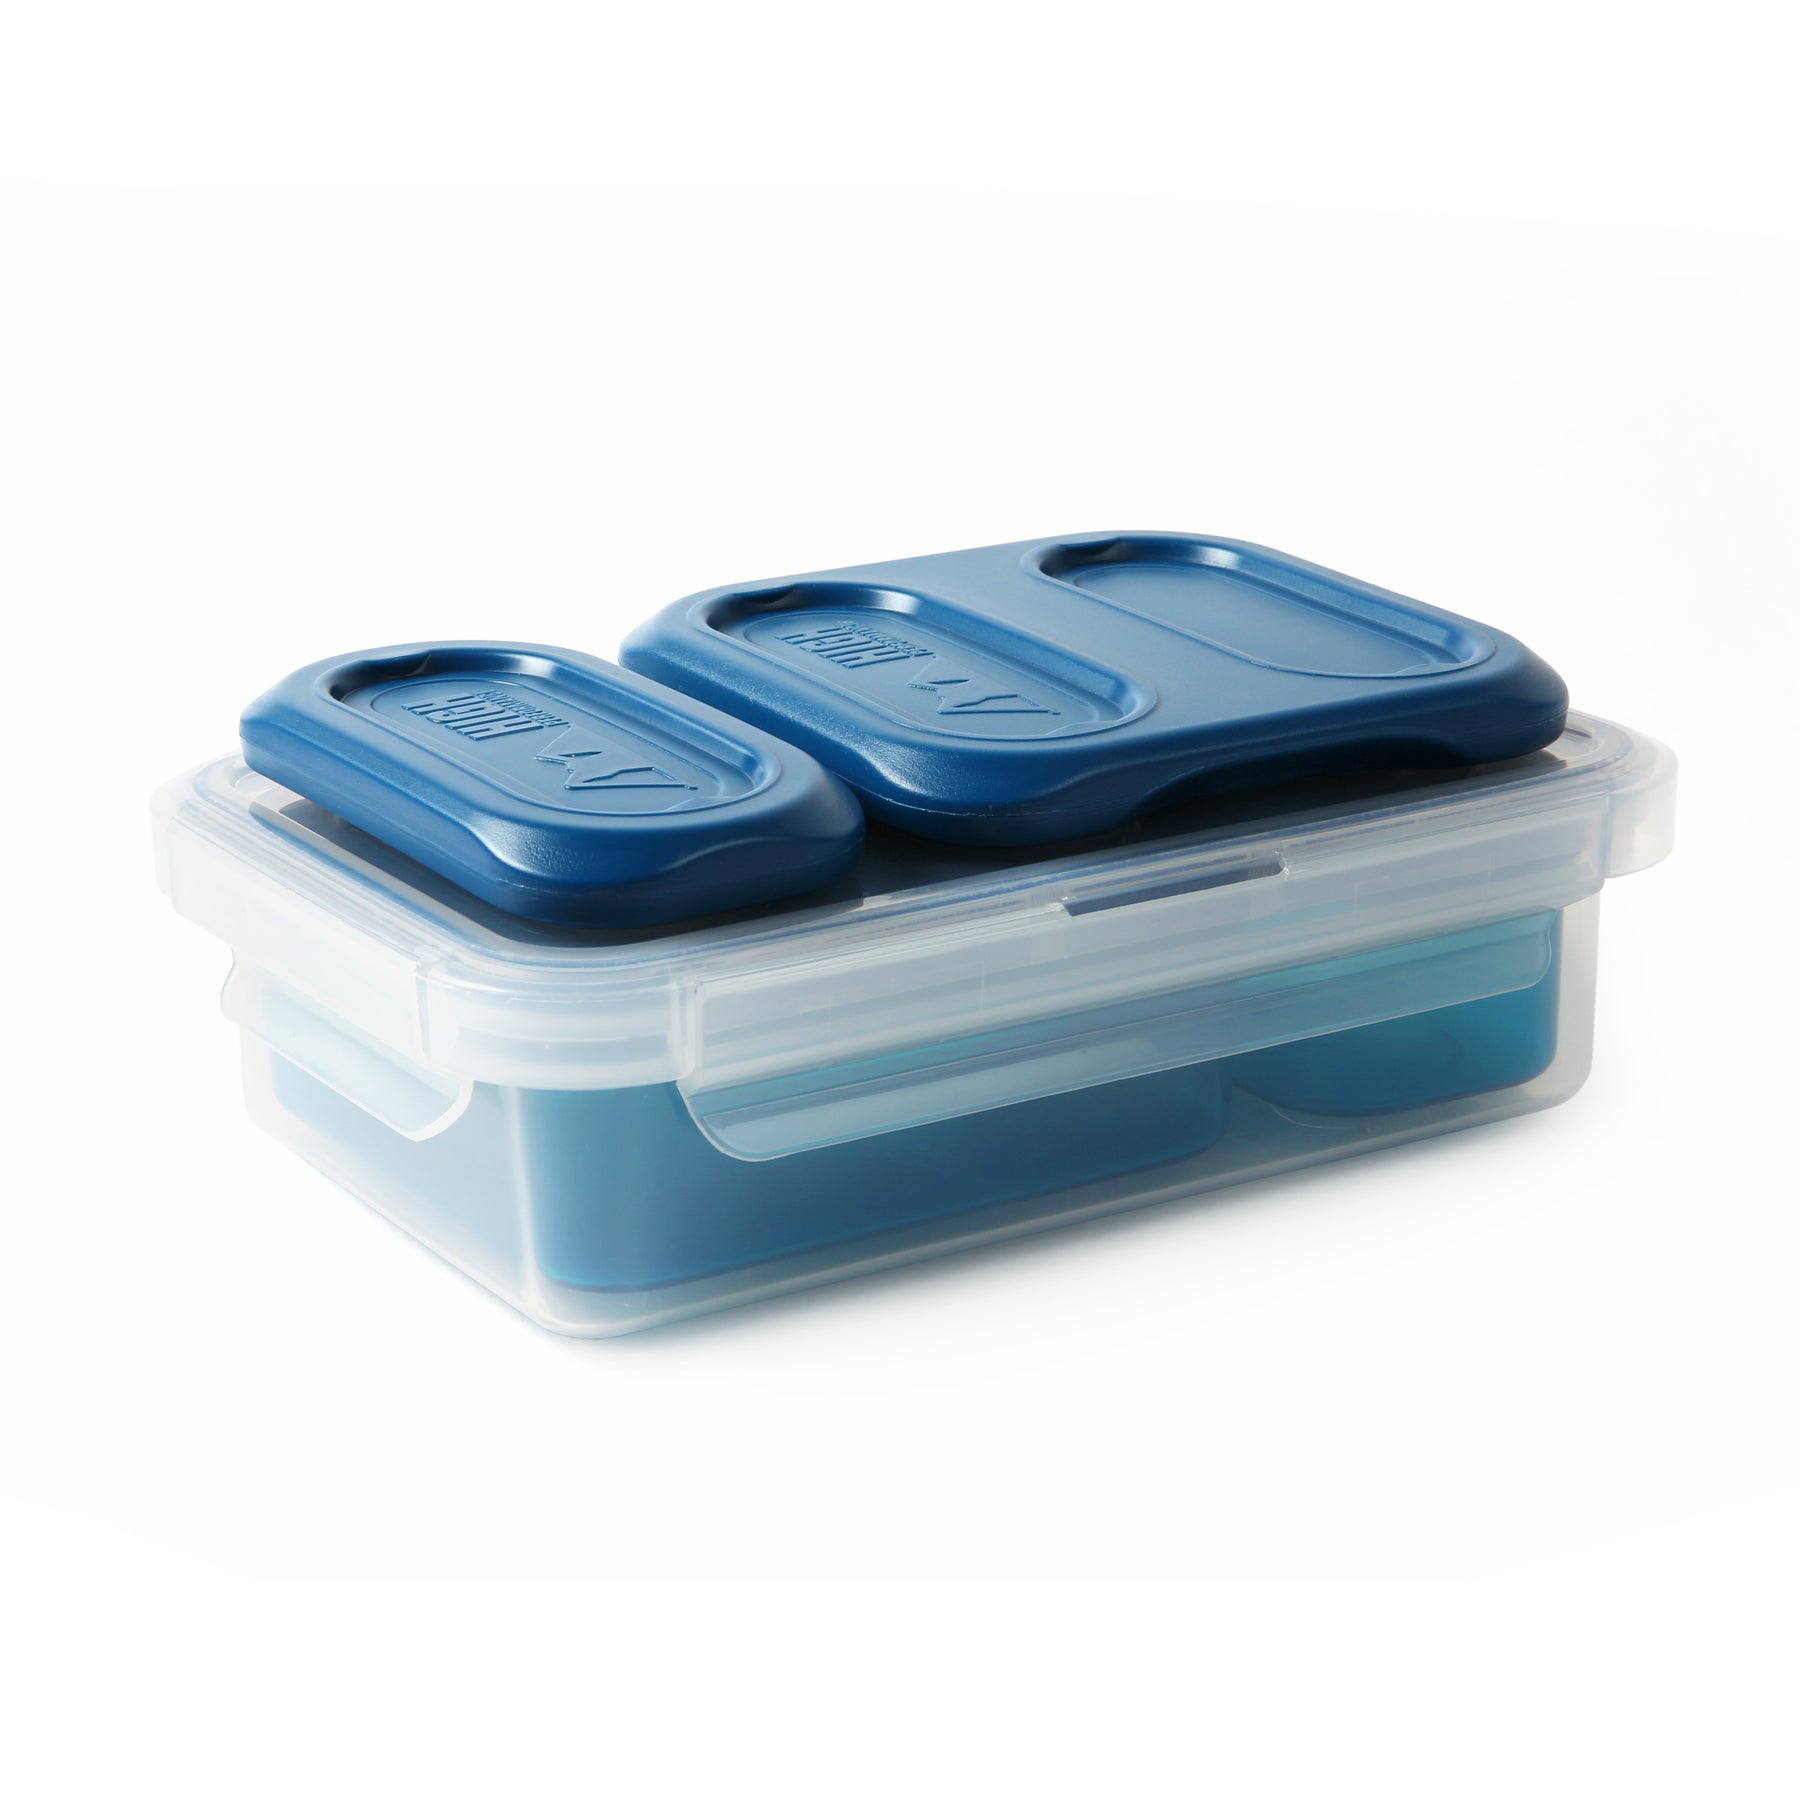 Arctic Zone Storage & Containers for Kids